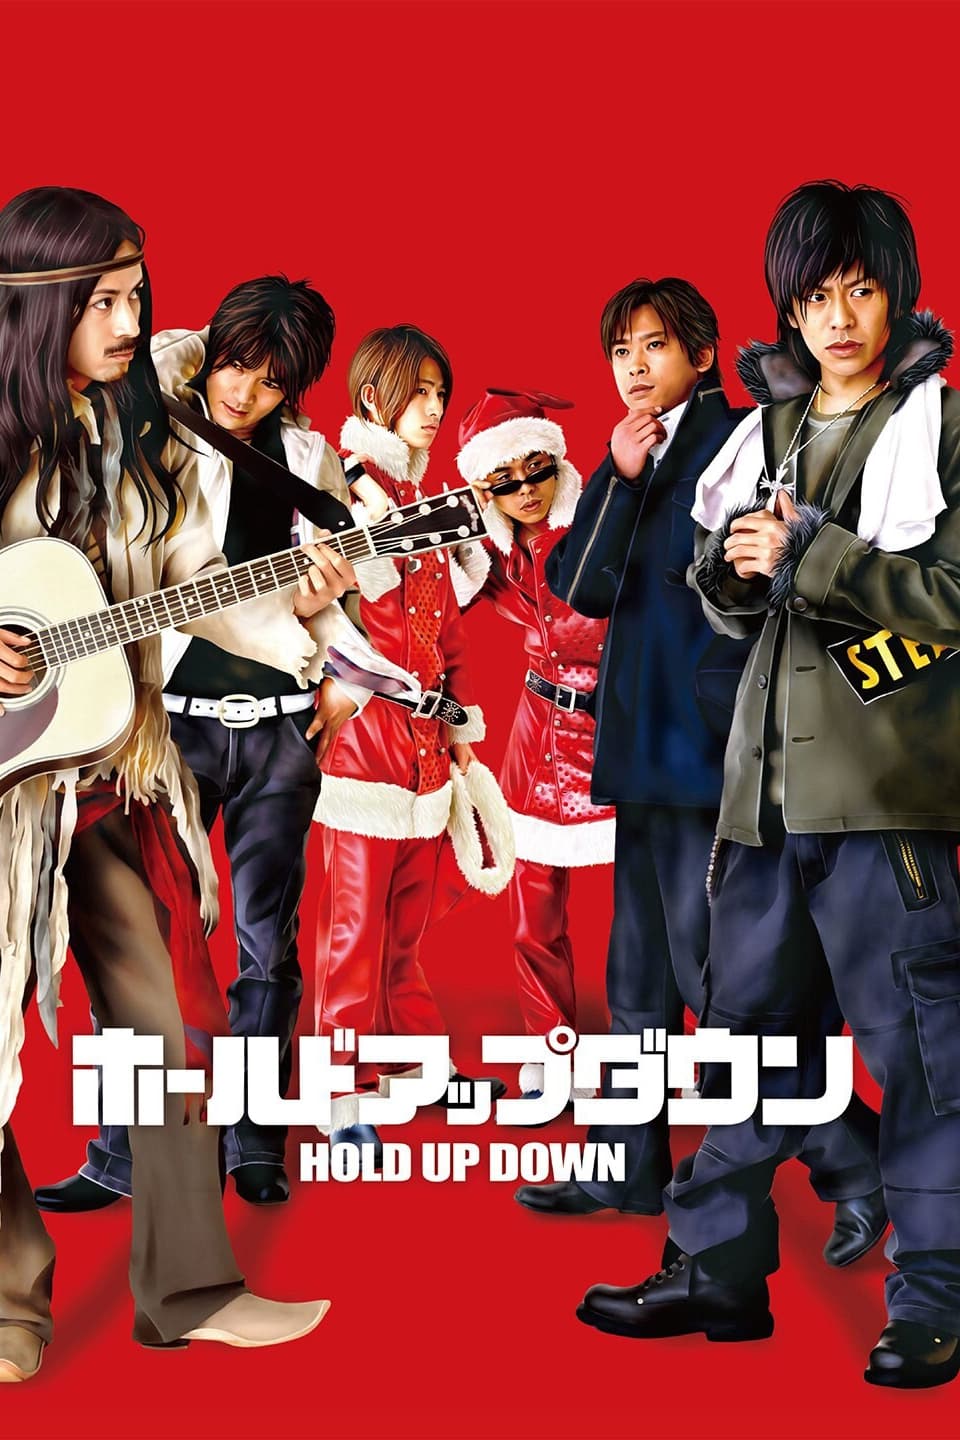 Hold Up Down 2005 Movie Poster